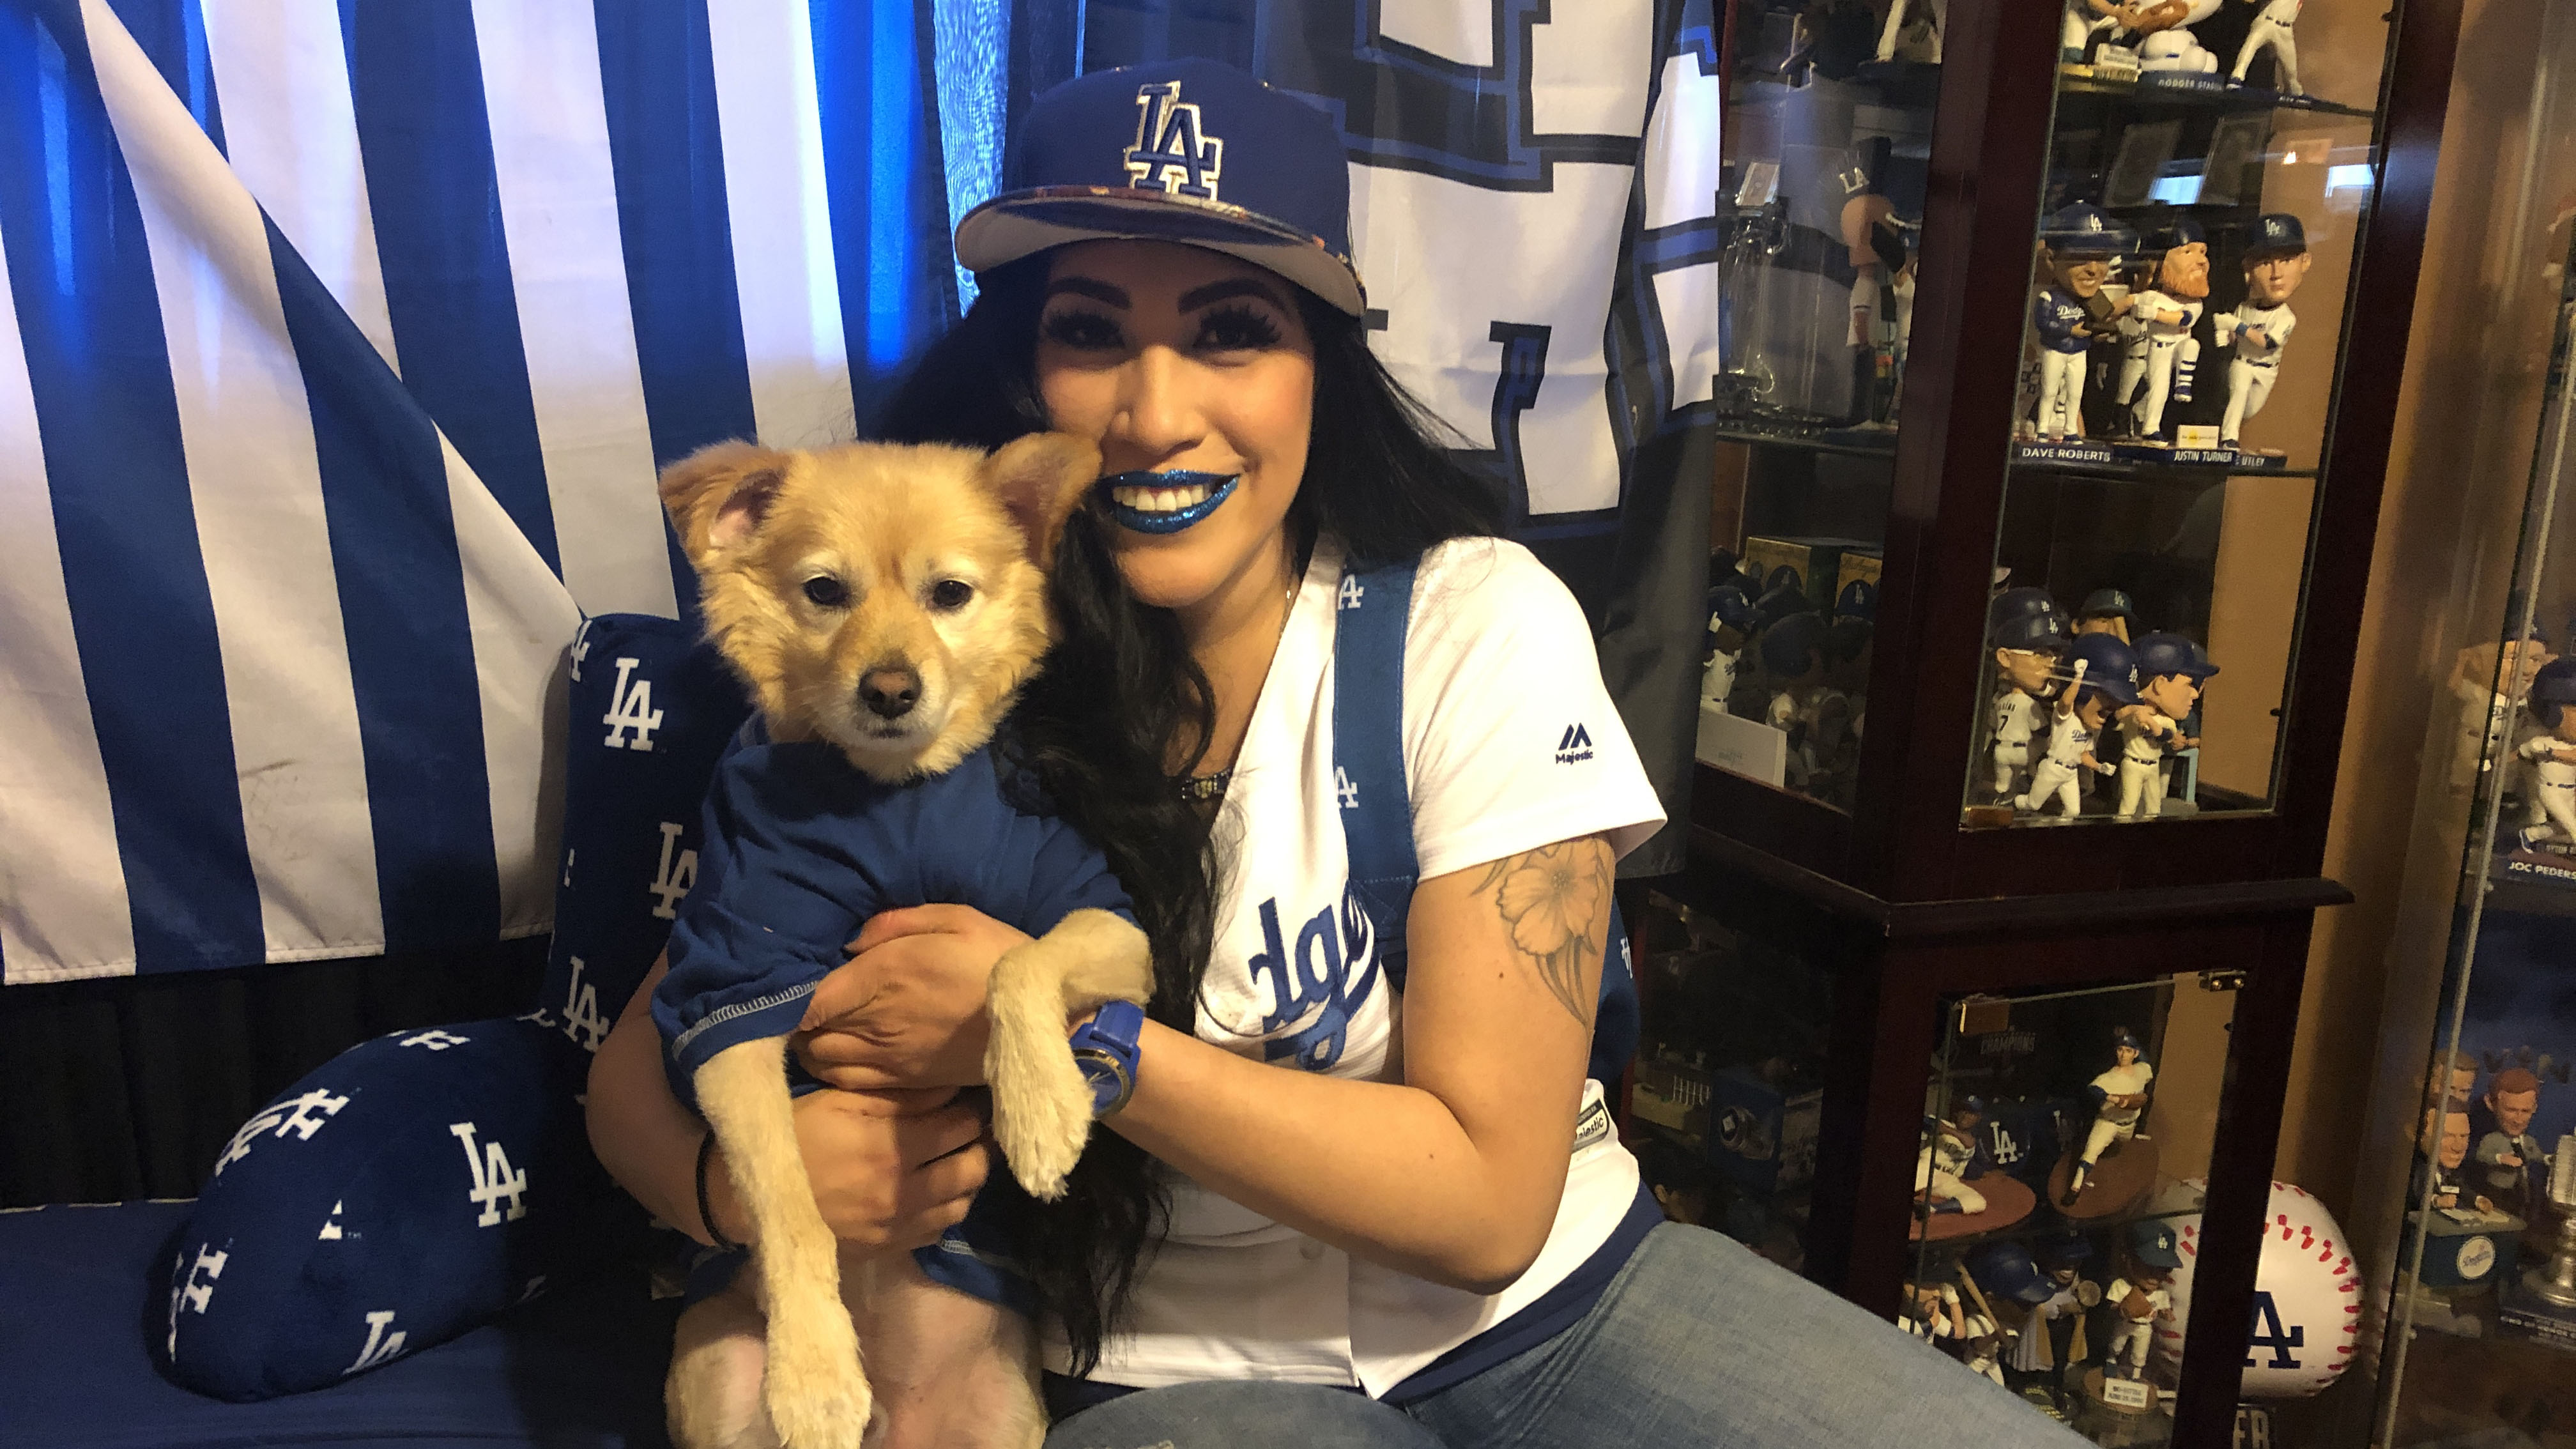 Dodgers fans are seen dressed up in costumes for halloween prior